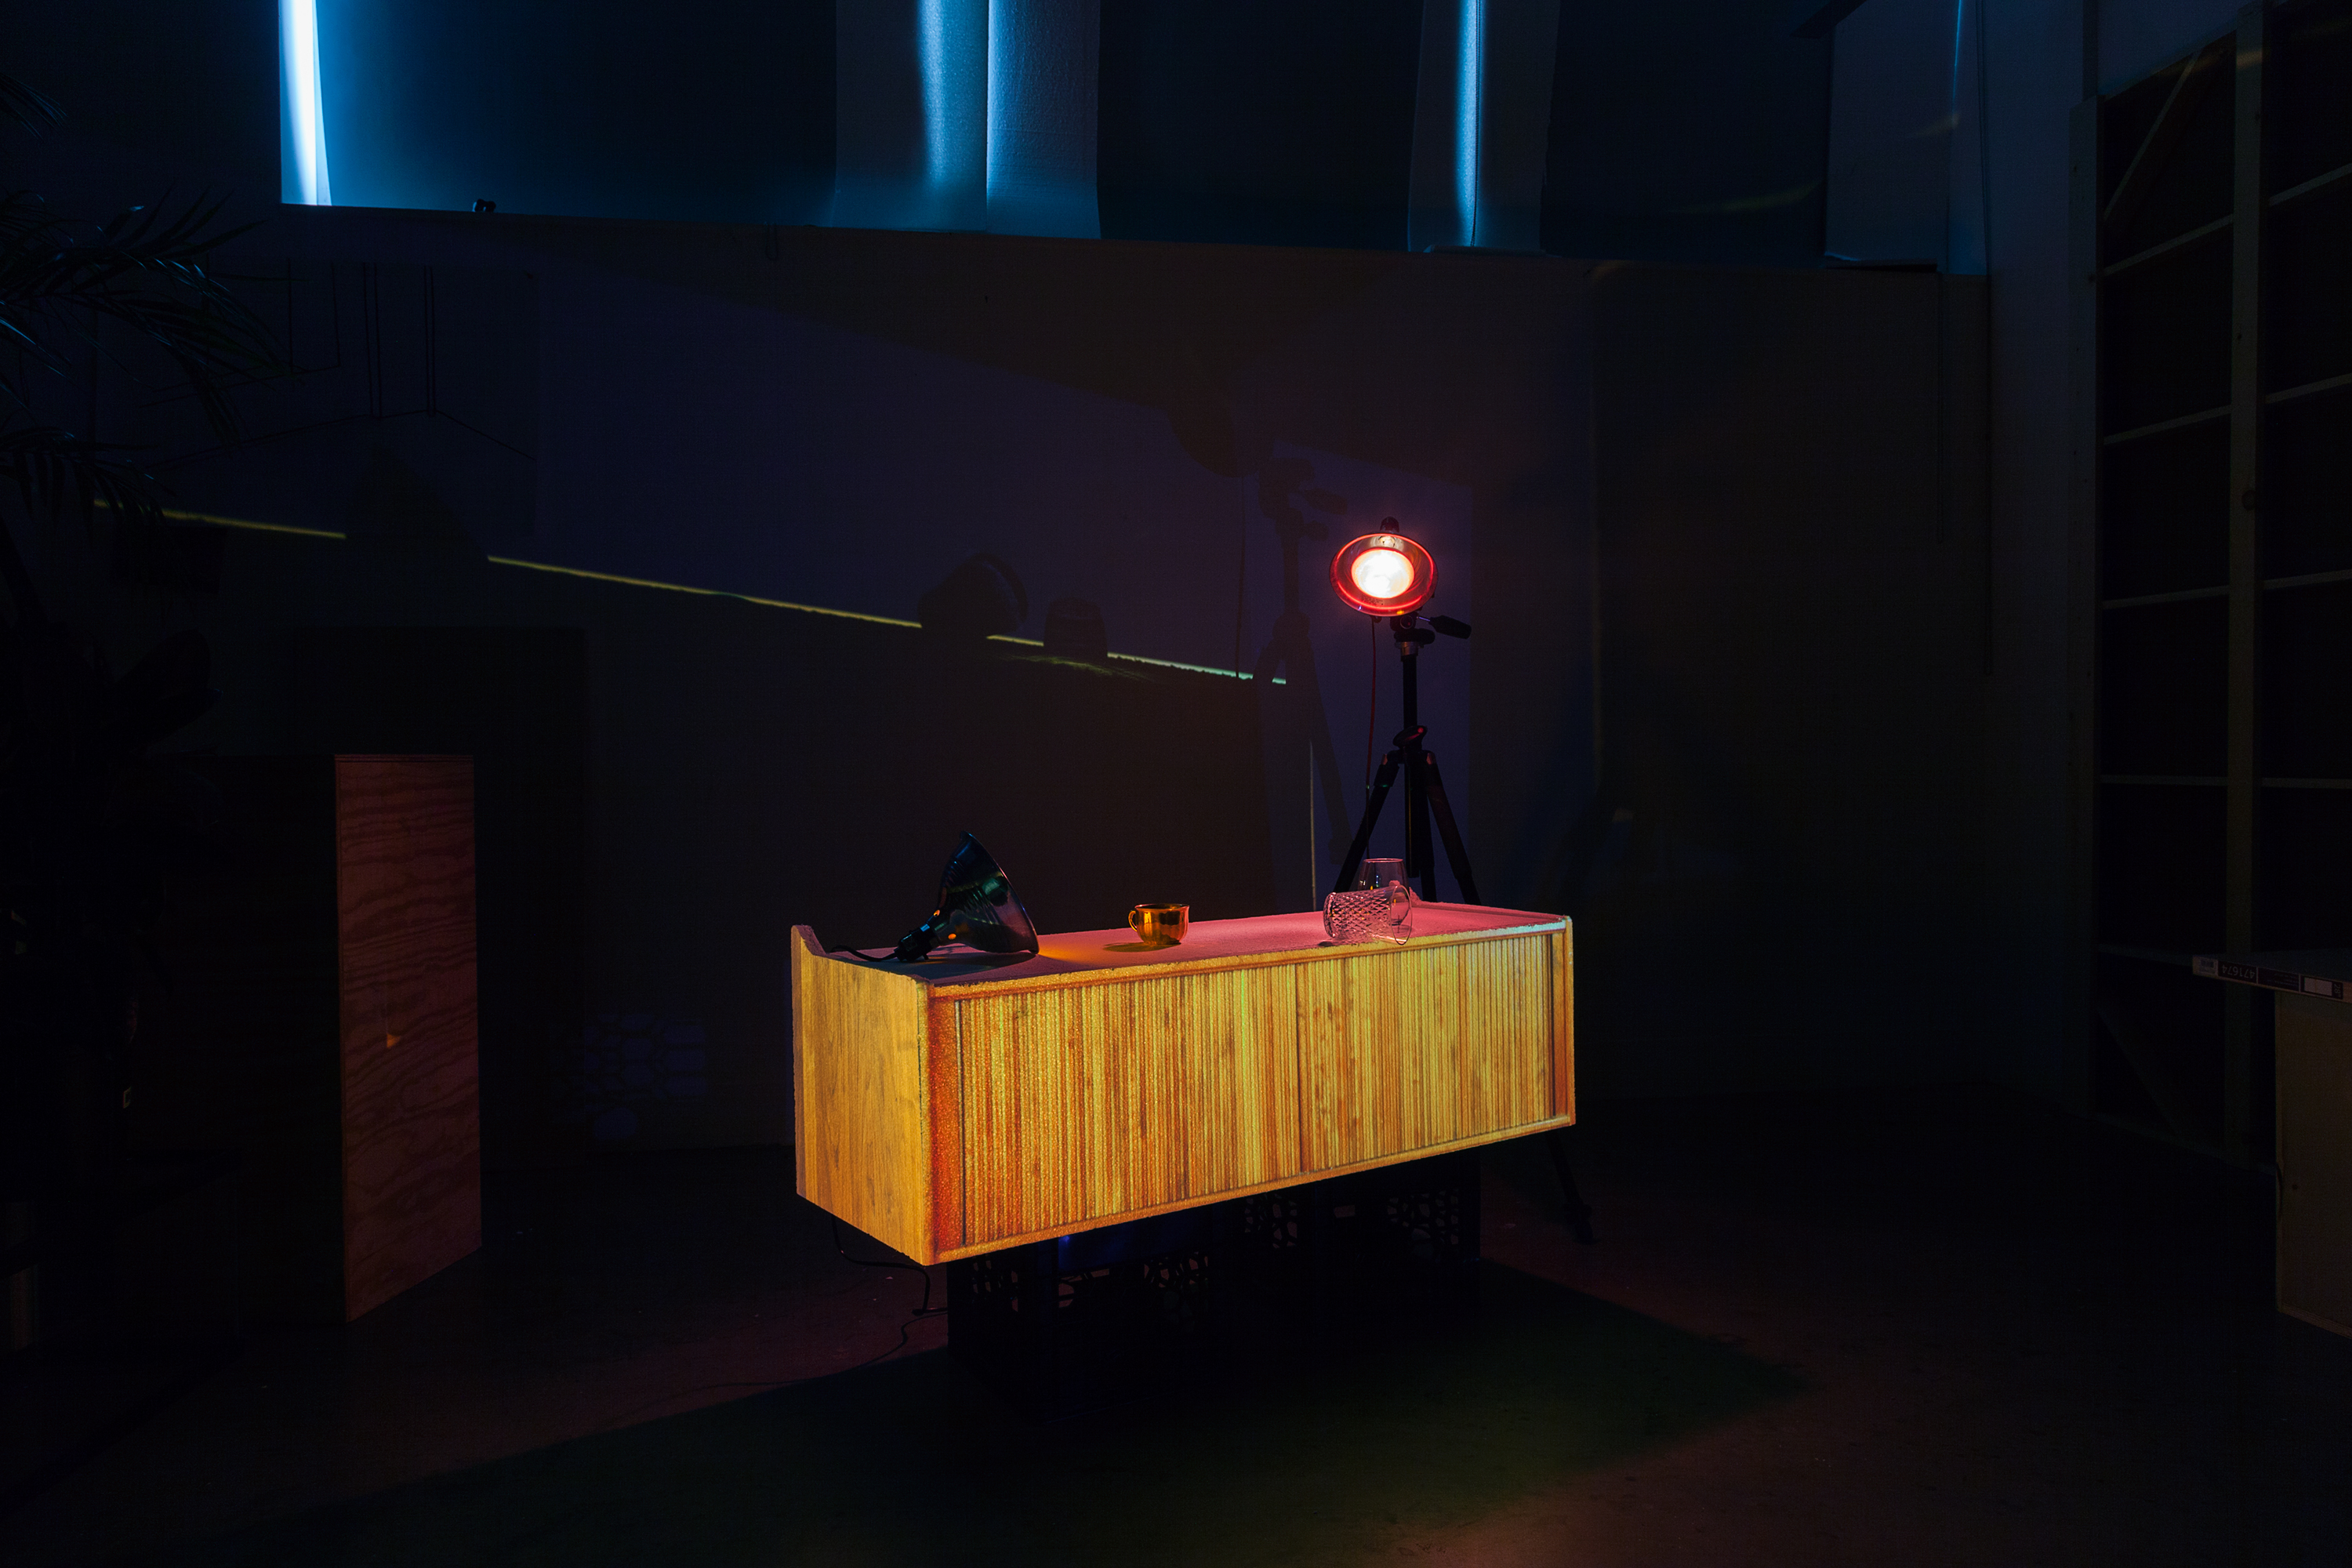 Kyle_Williams-04_UNTITLED_CONSOLE_2015_PROJECTION_ON_STYROFOAM_WITH_OBJECTS_VIEW_2_